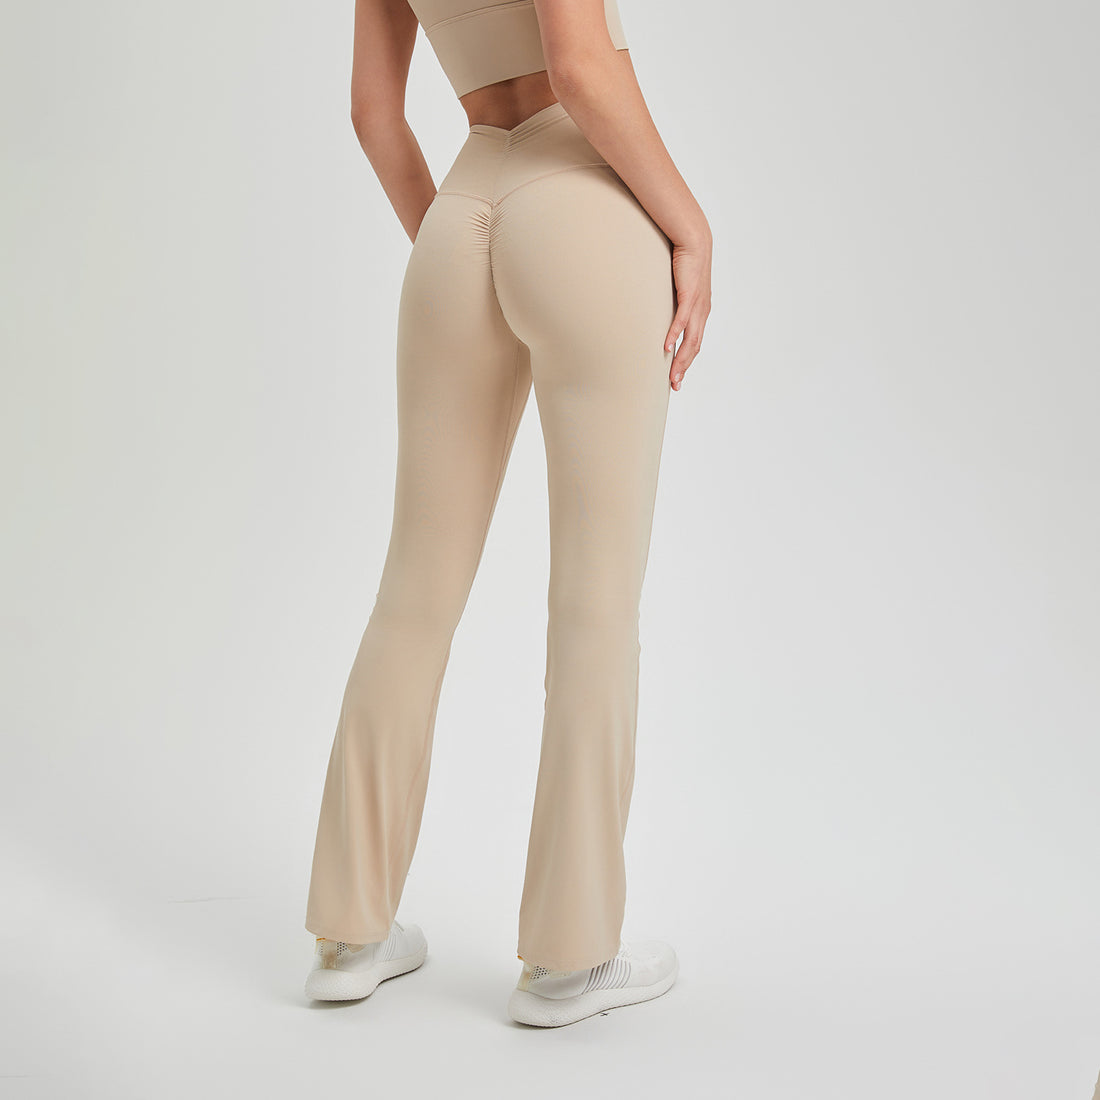 The Best Pleated Hip Lifting Pants For Women